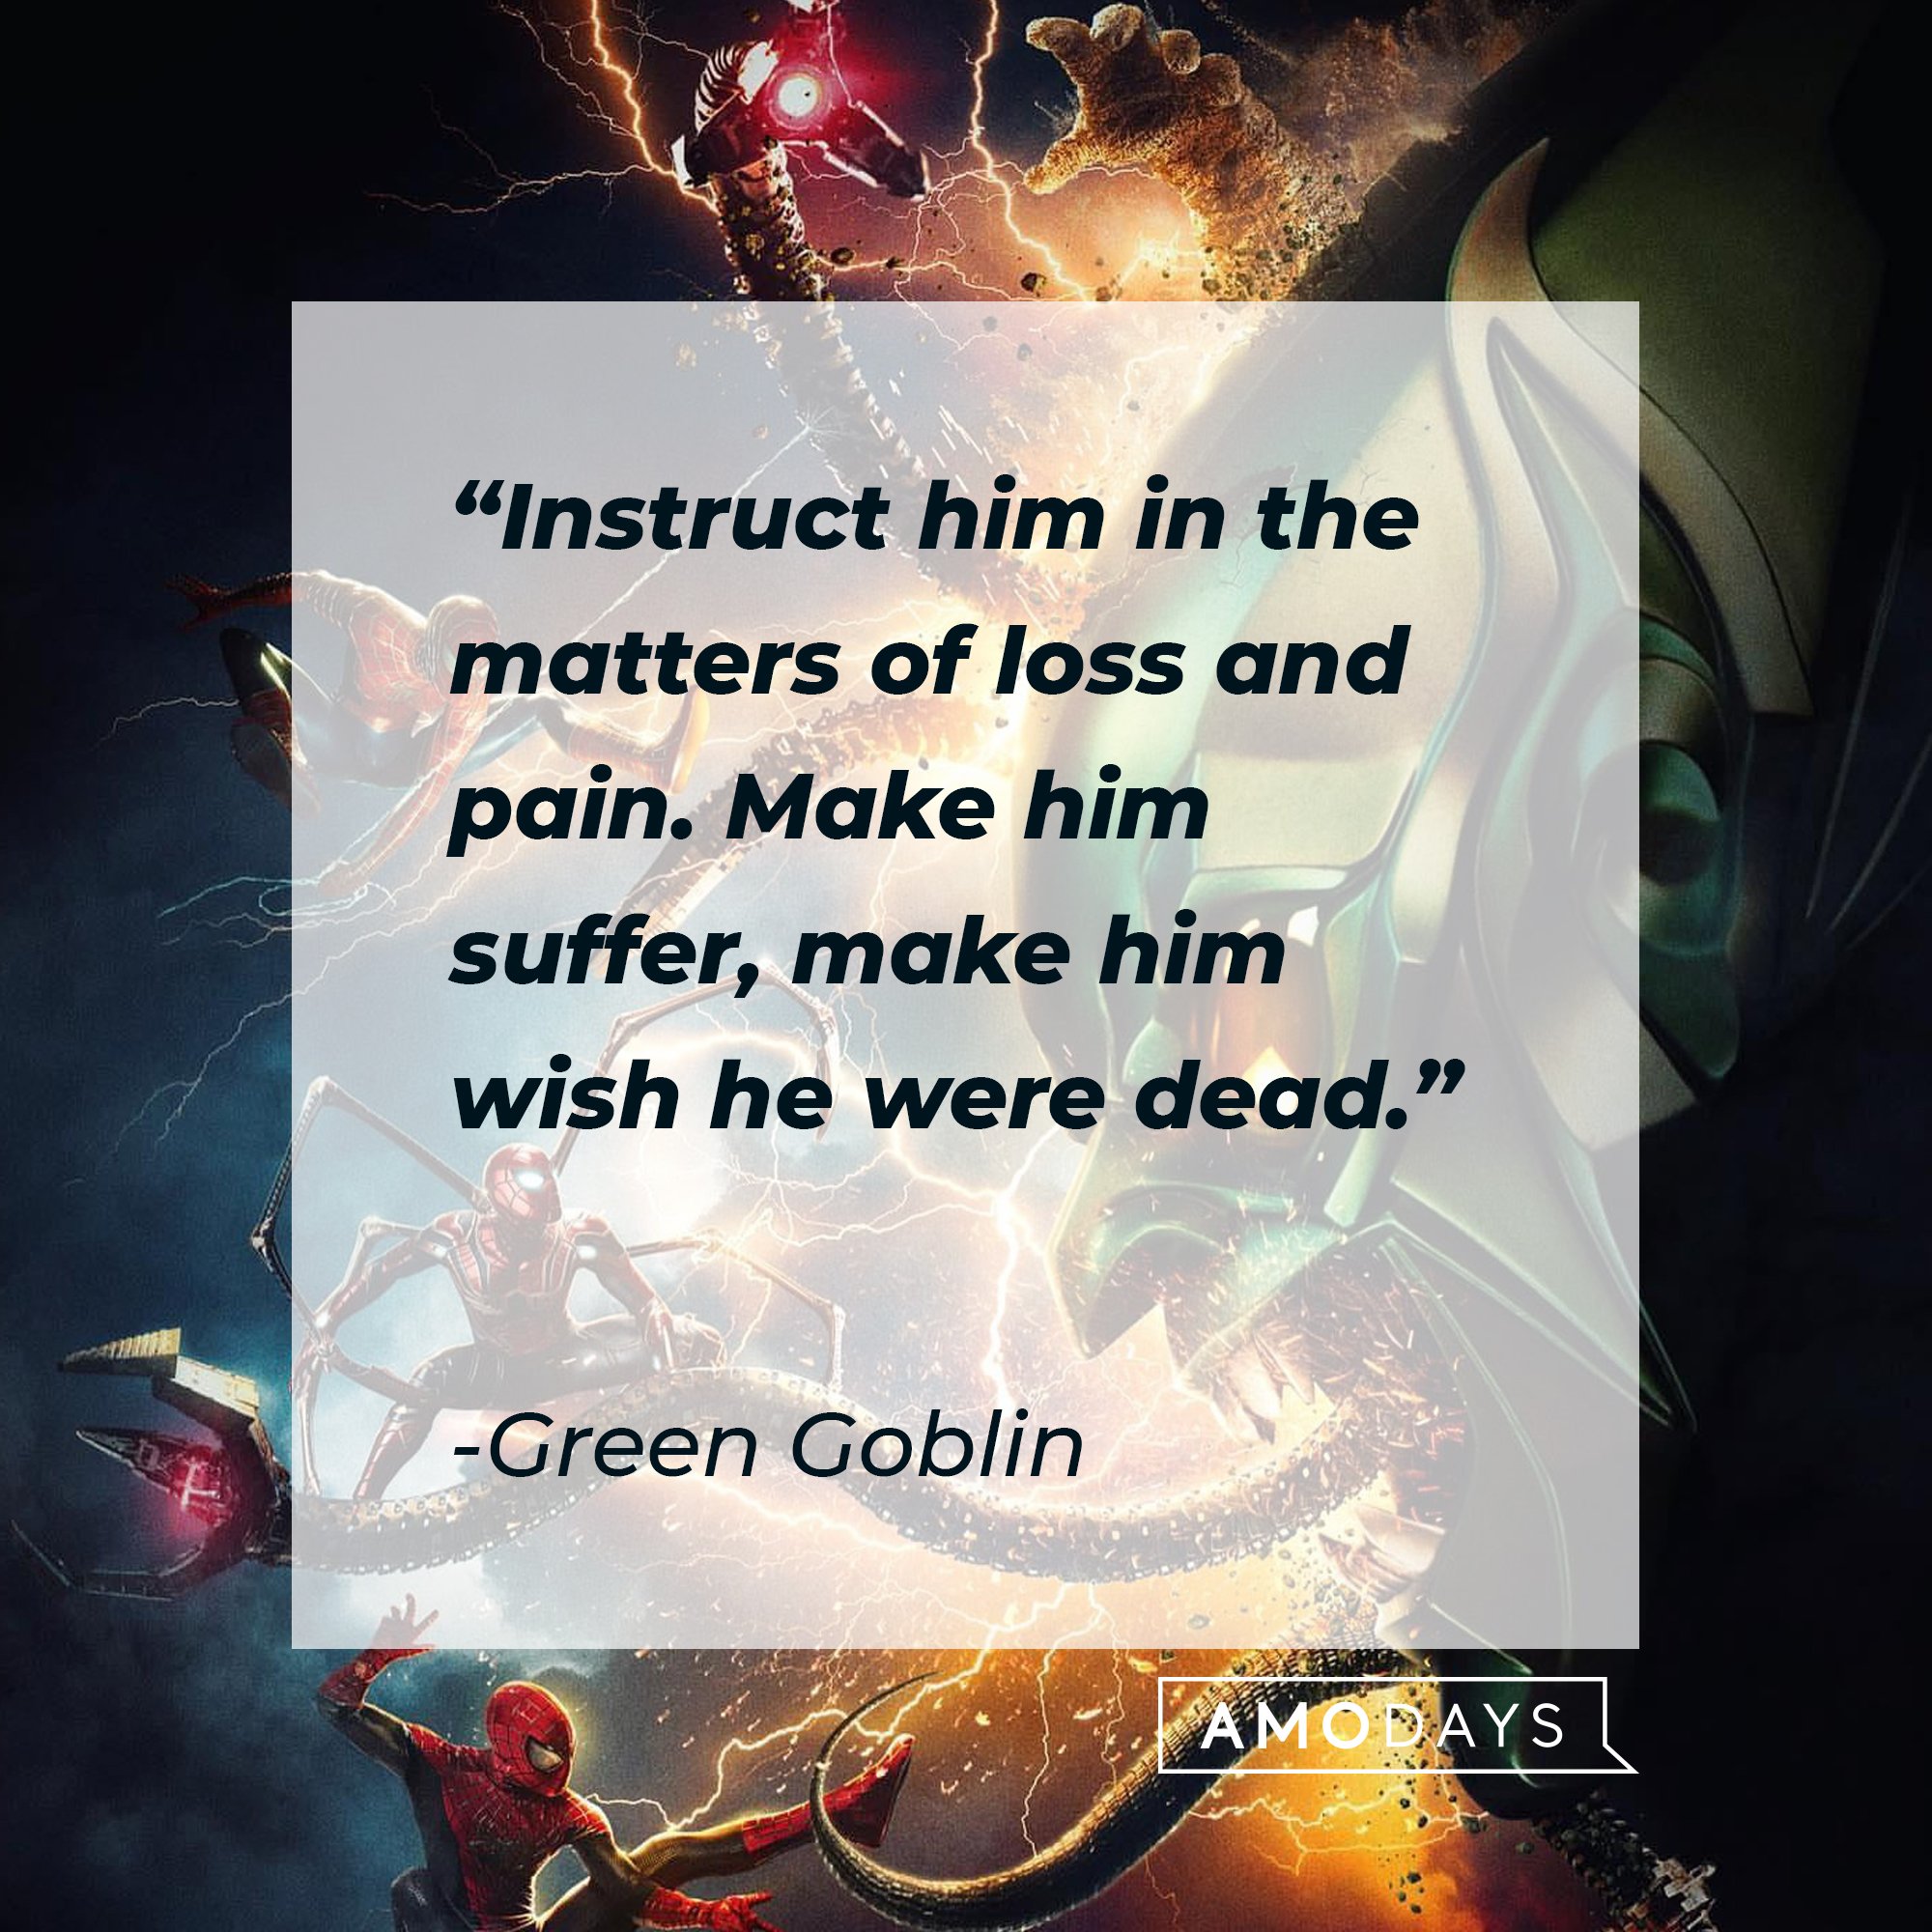 Green Goblin’s quote: “Instruct him in the matters of loss and pain. Make him suffer, make him wish he were dead.” | Image: AmoDays